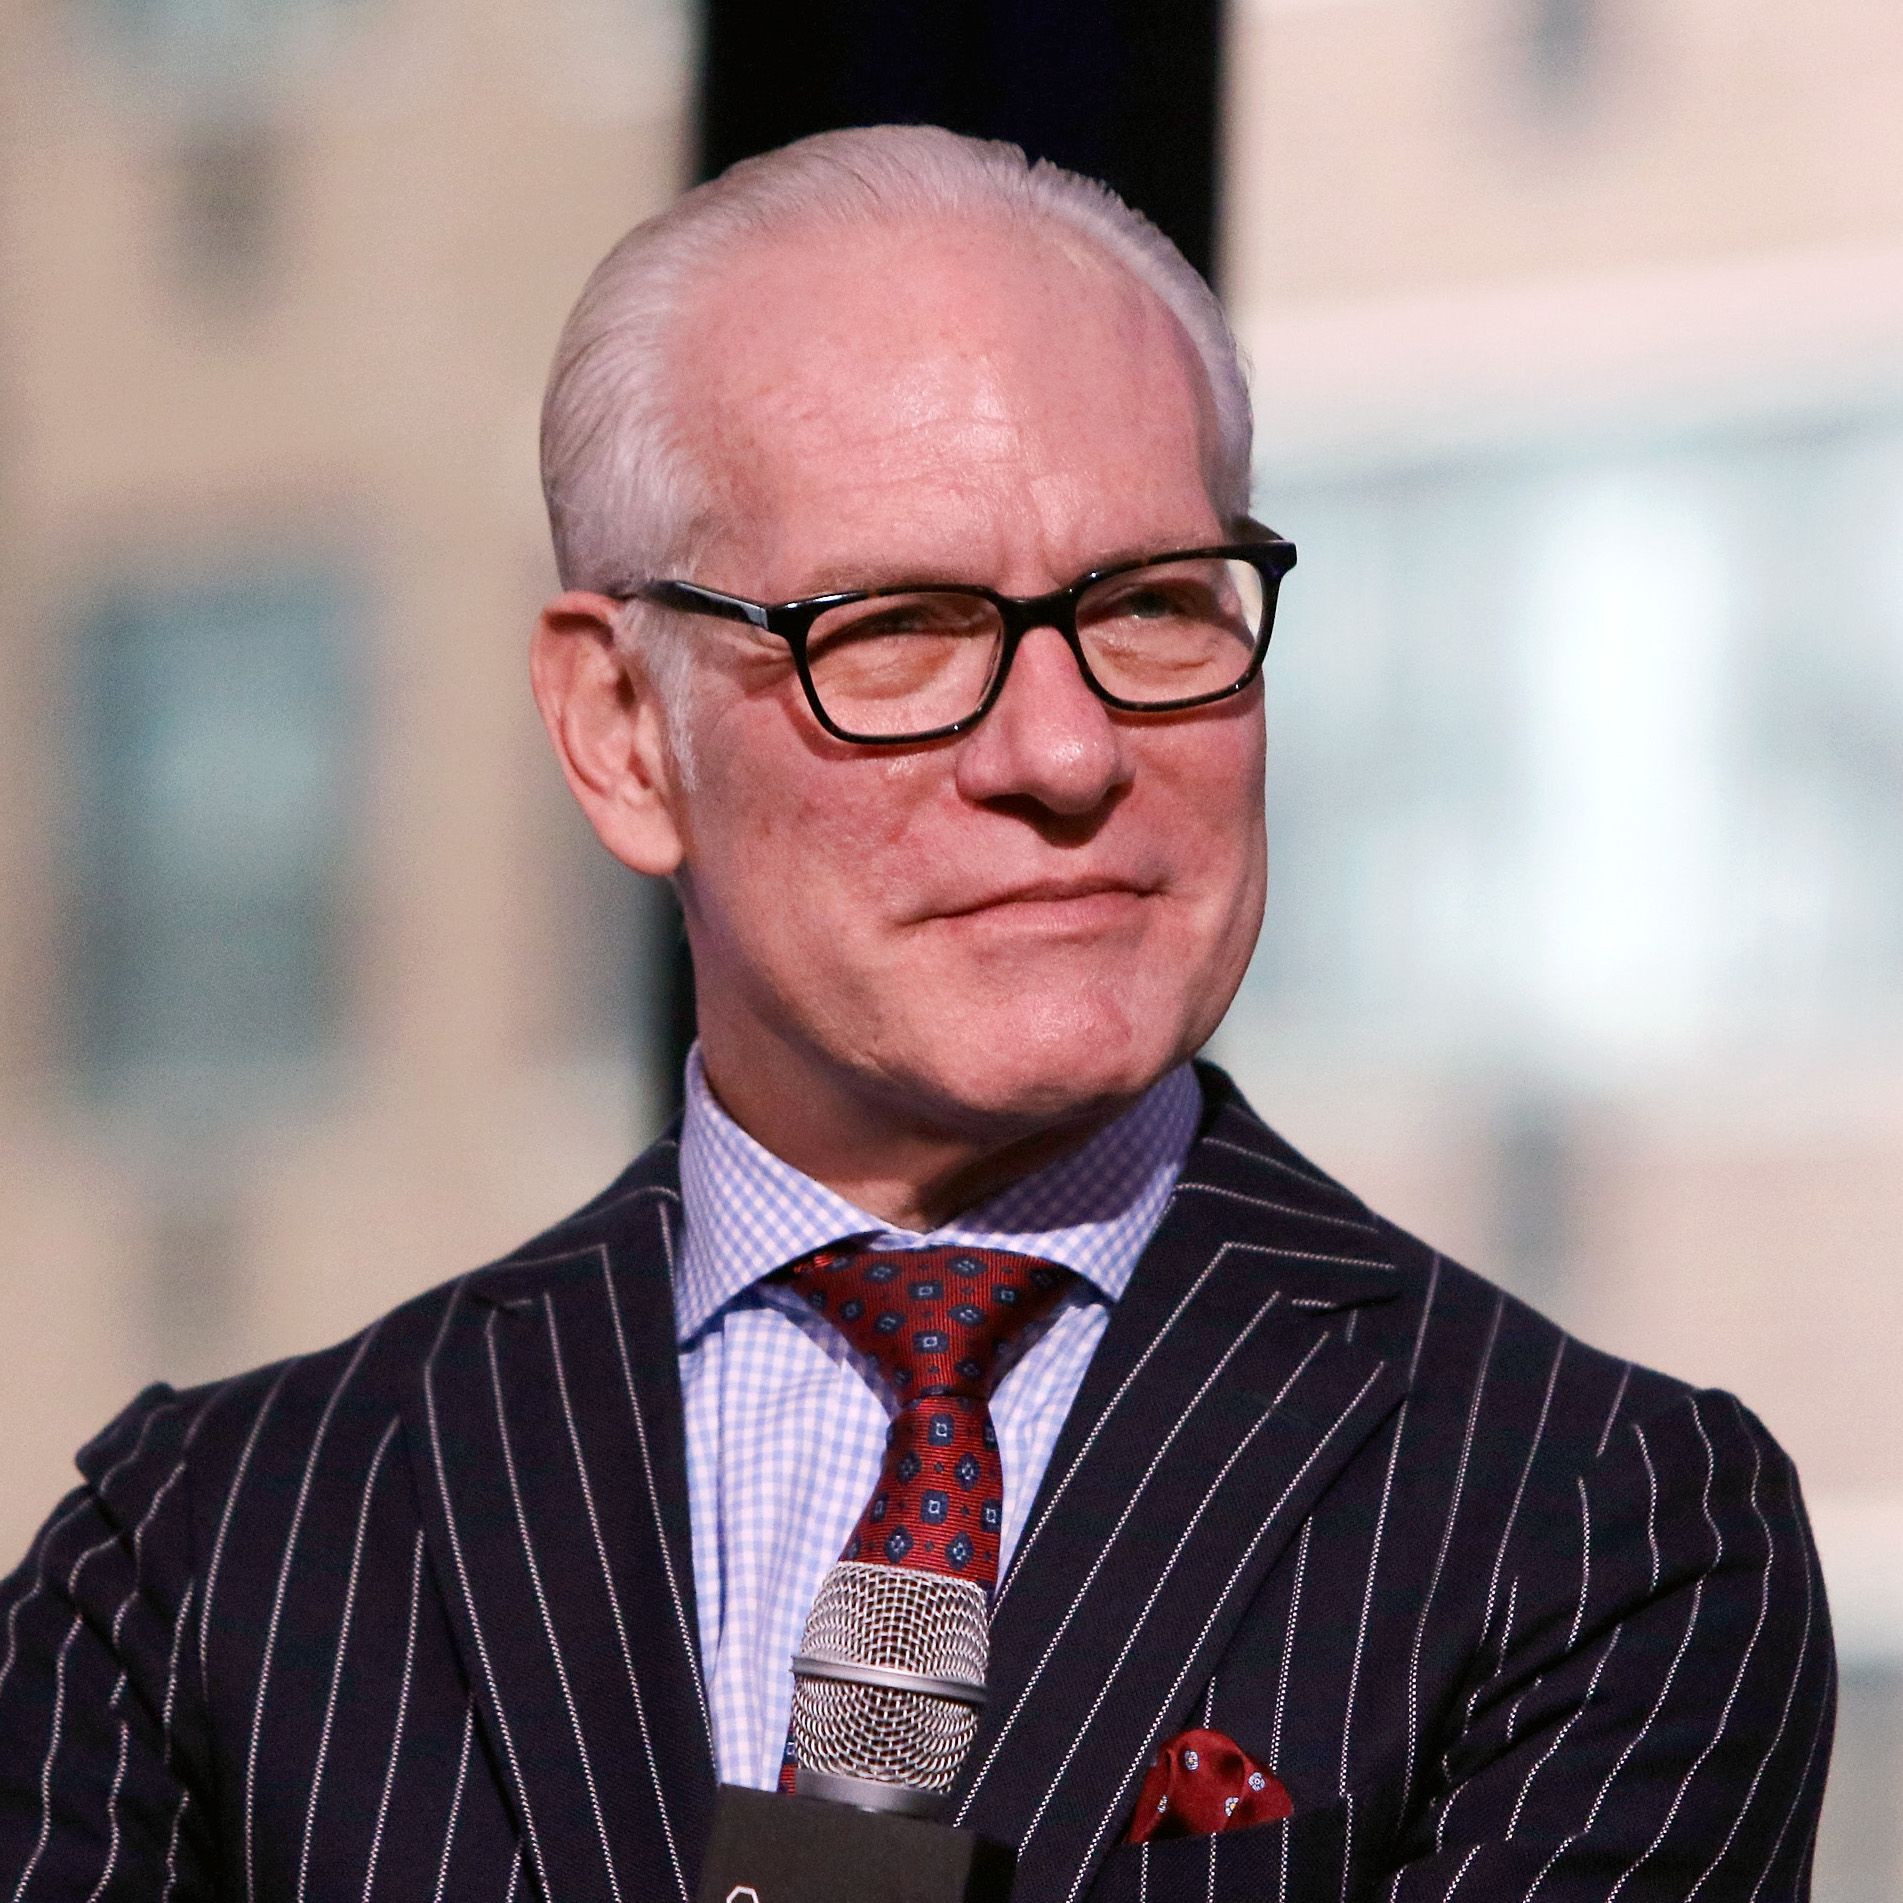 Which designer saved by Tim Gunn was the most successful after the save